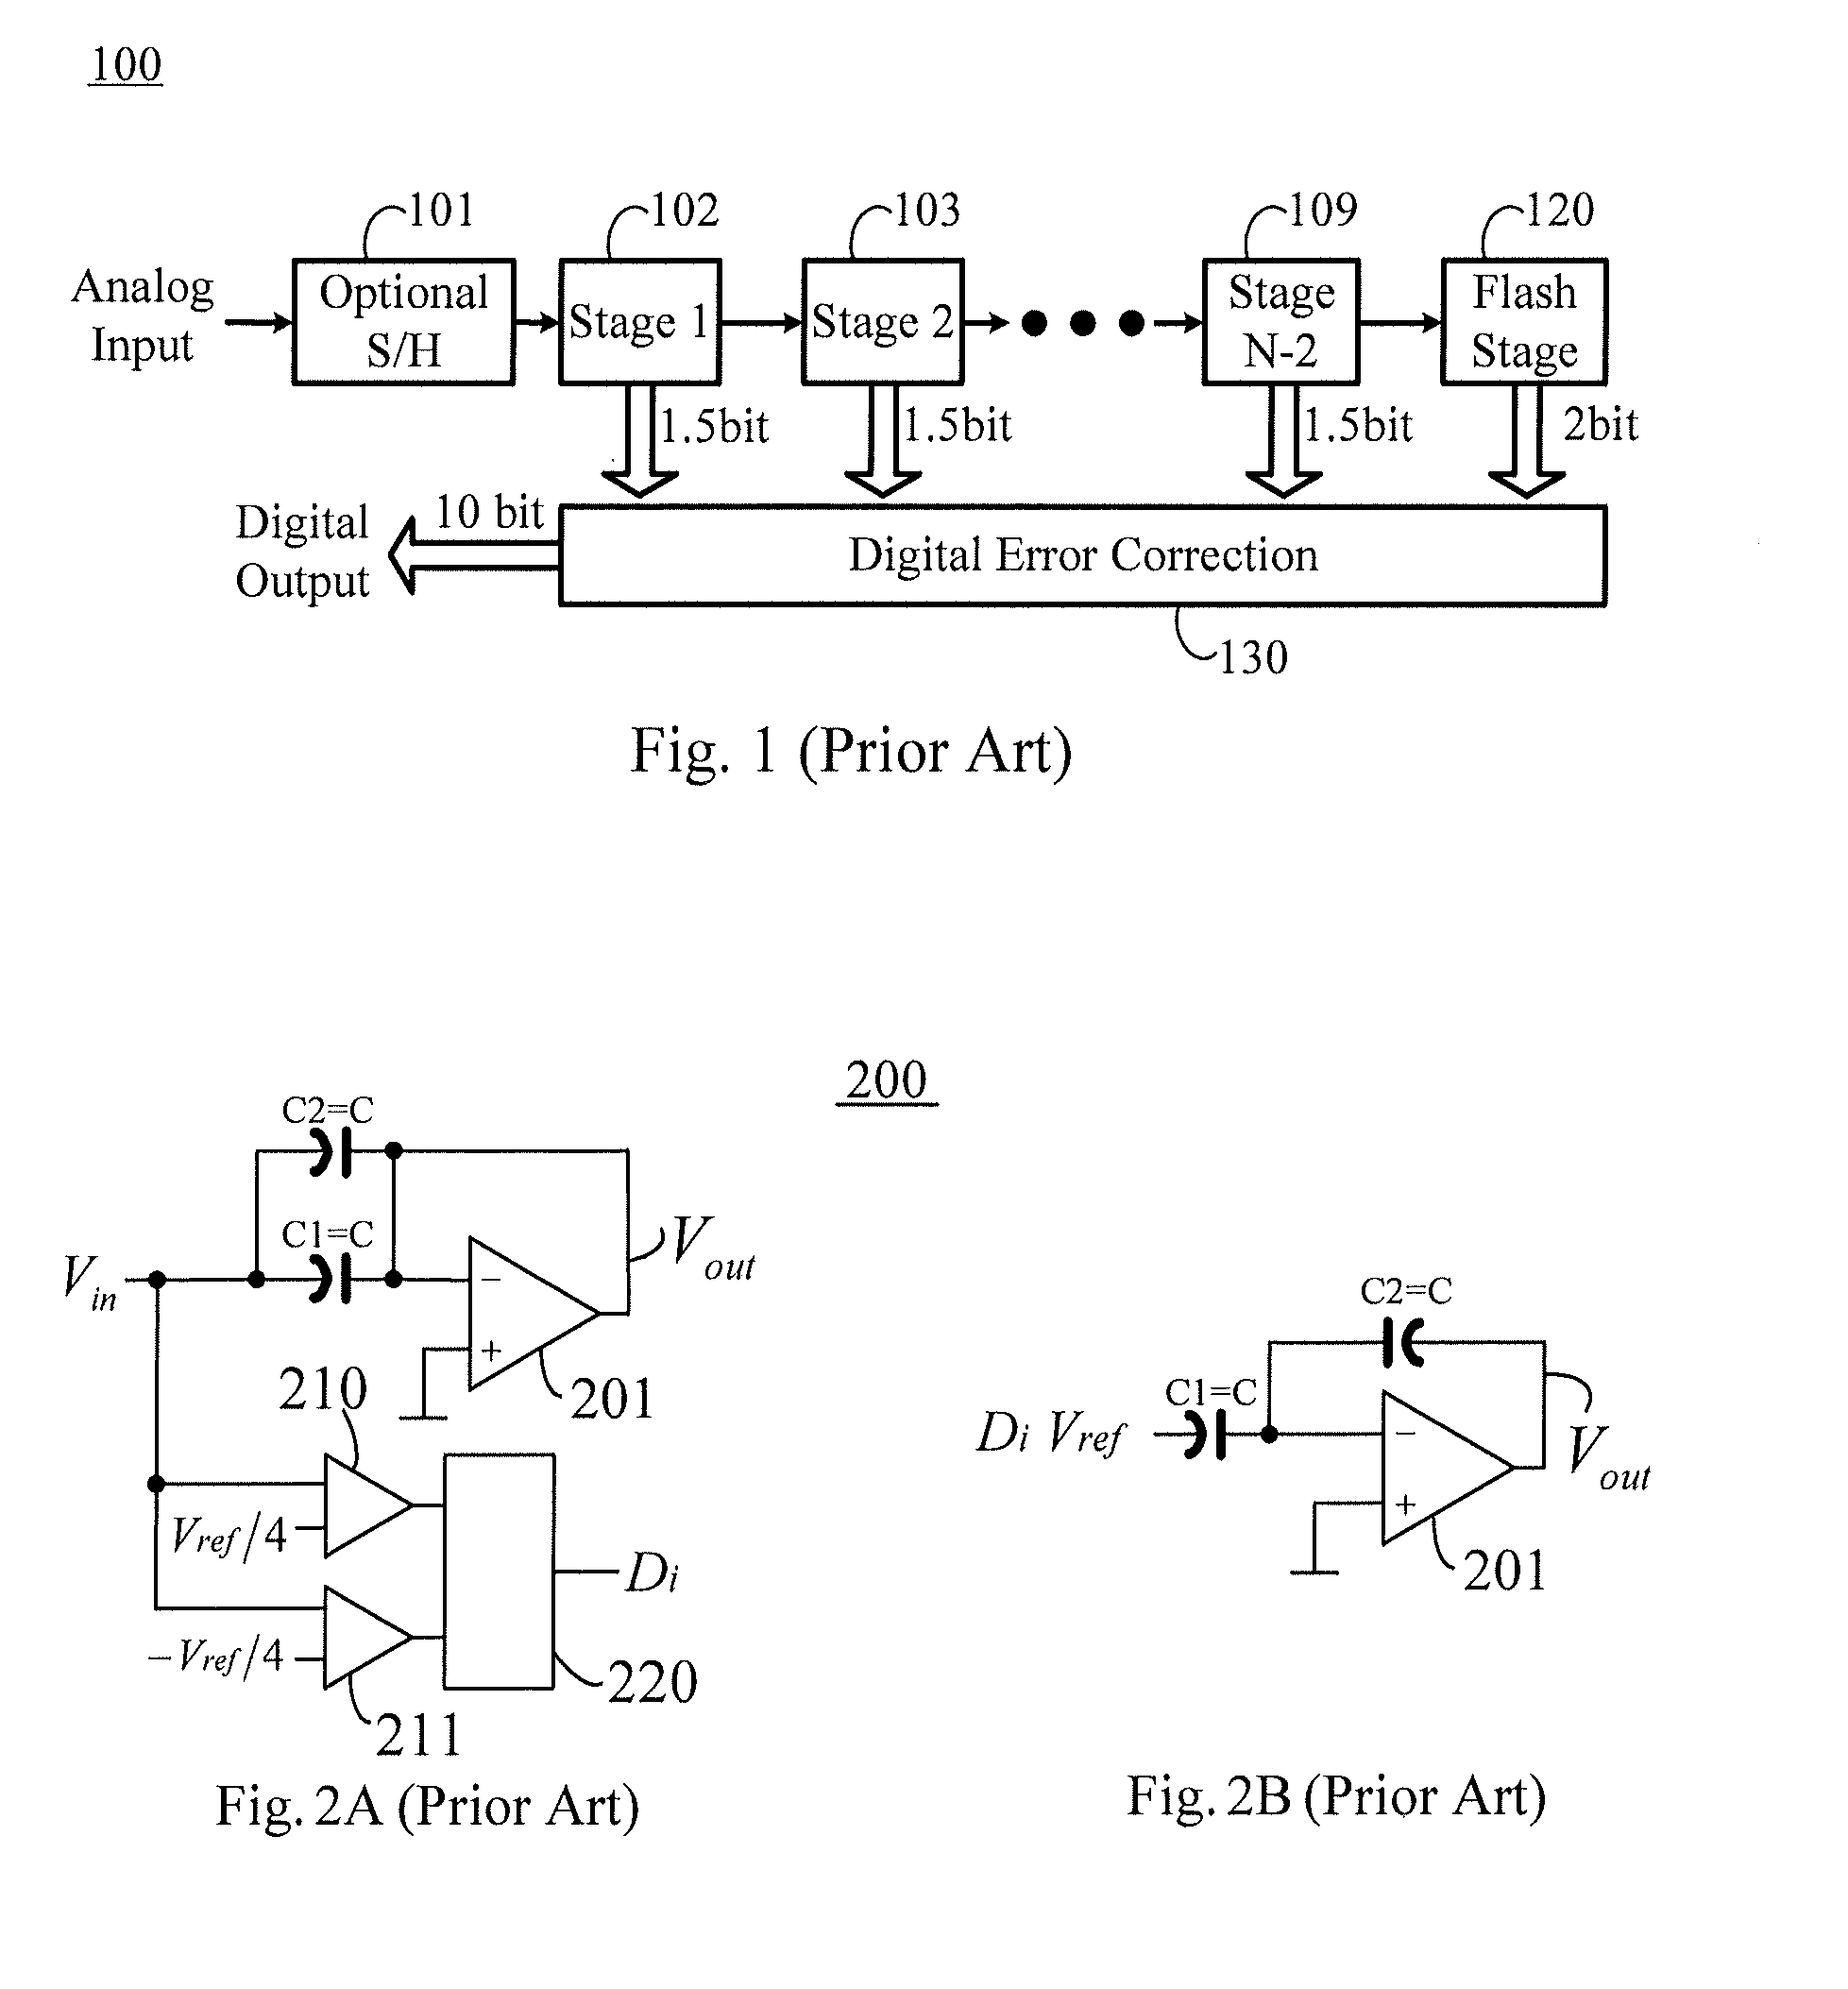 Pipelined analog-to-digital converter and sub-converter stage